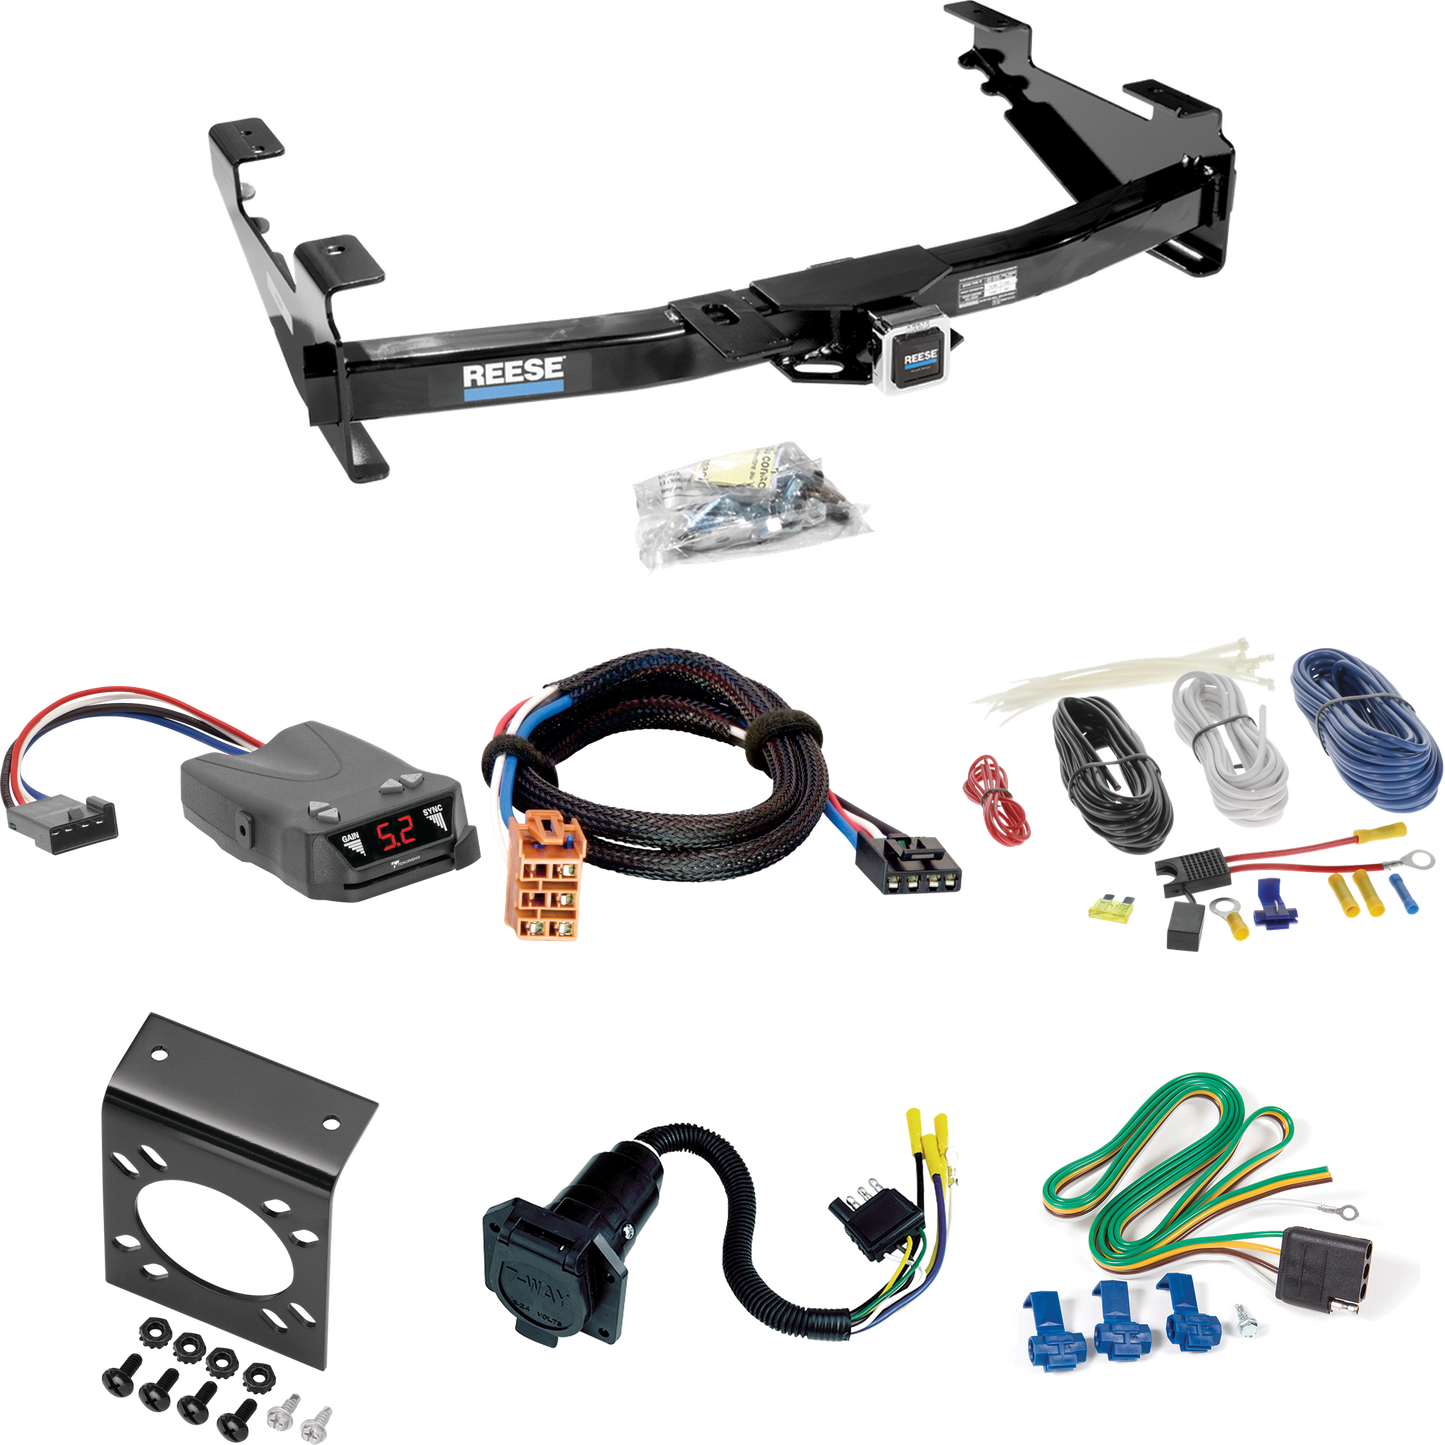 Fits 2003-2007 GMC Sierra 3500 Trailer Hitch Tow PKG w/ Tekonsha Brakeman IV Brake Control + Plug & Play BC Adapter + 7-Way RV Wiring (For (Classic) Models) By Reese Towpower